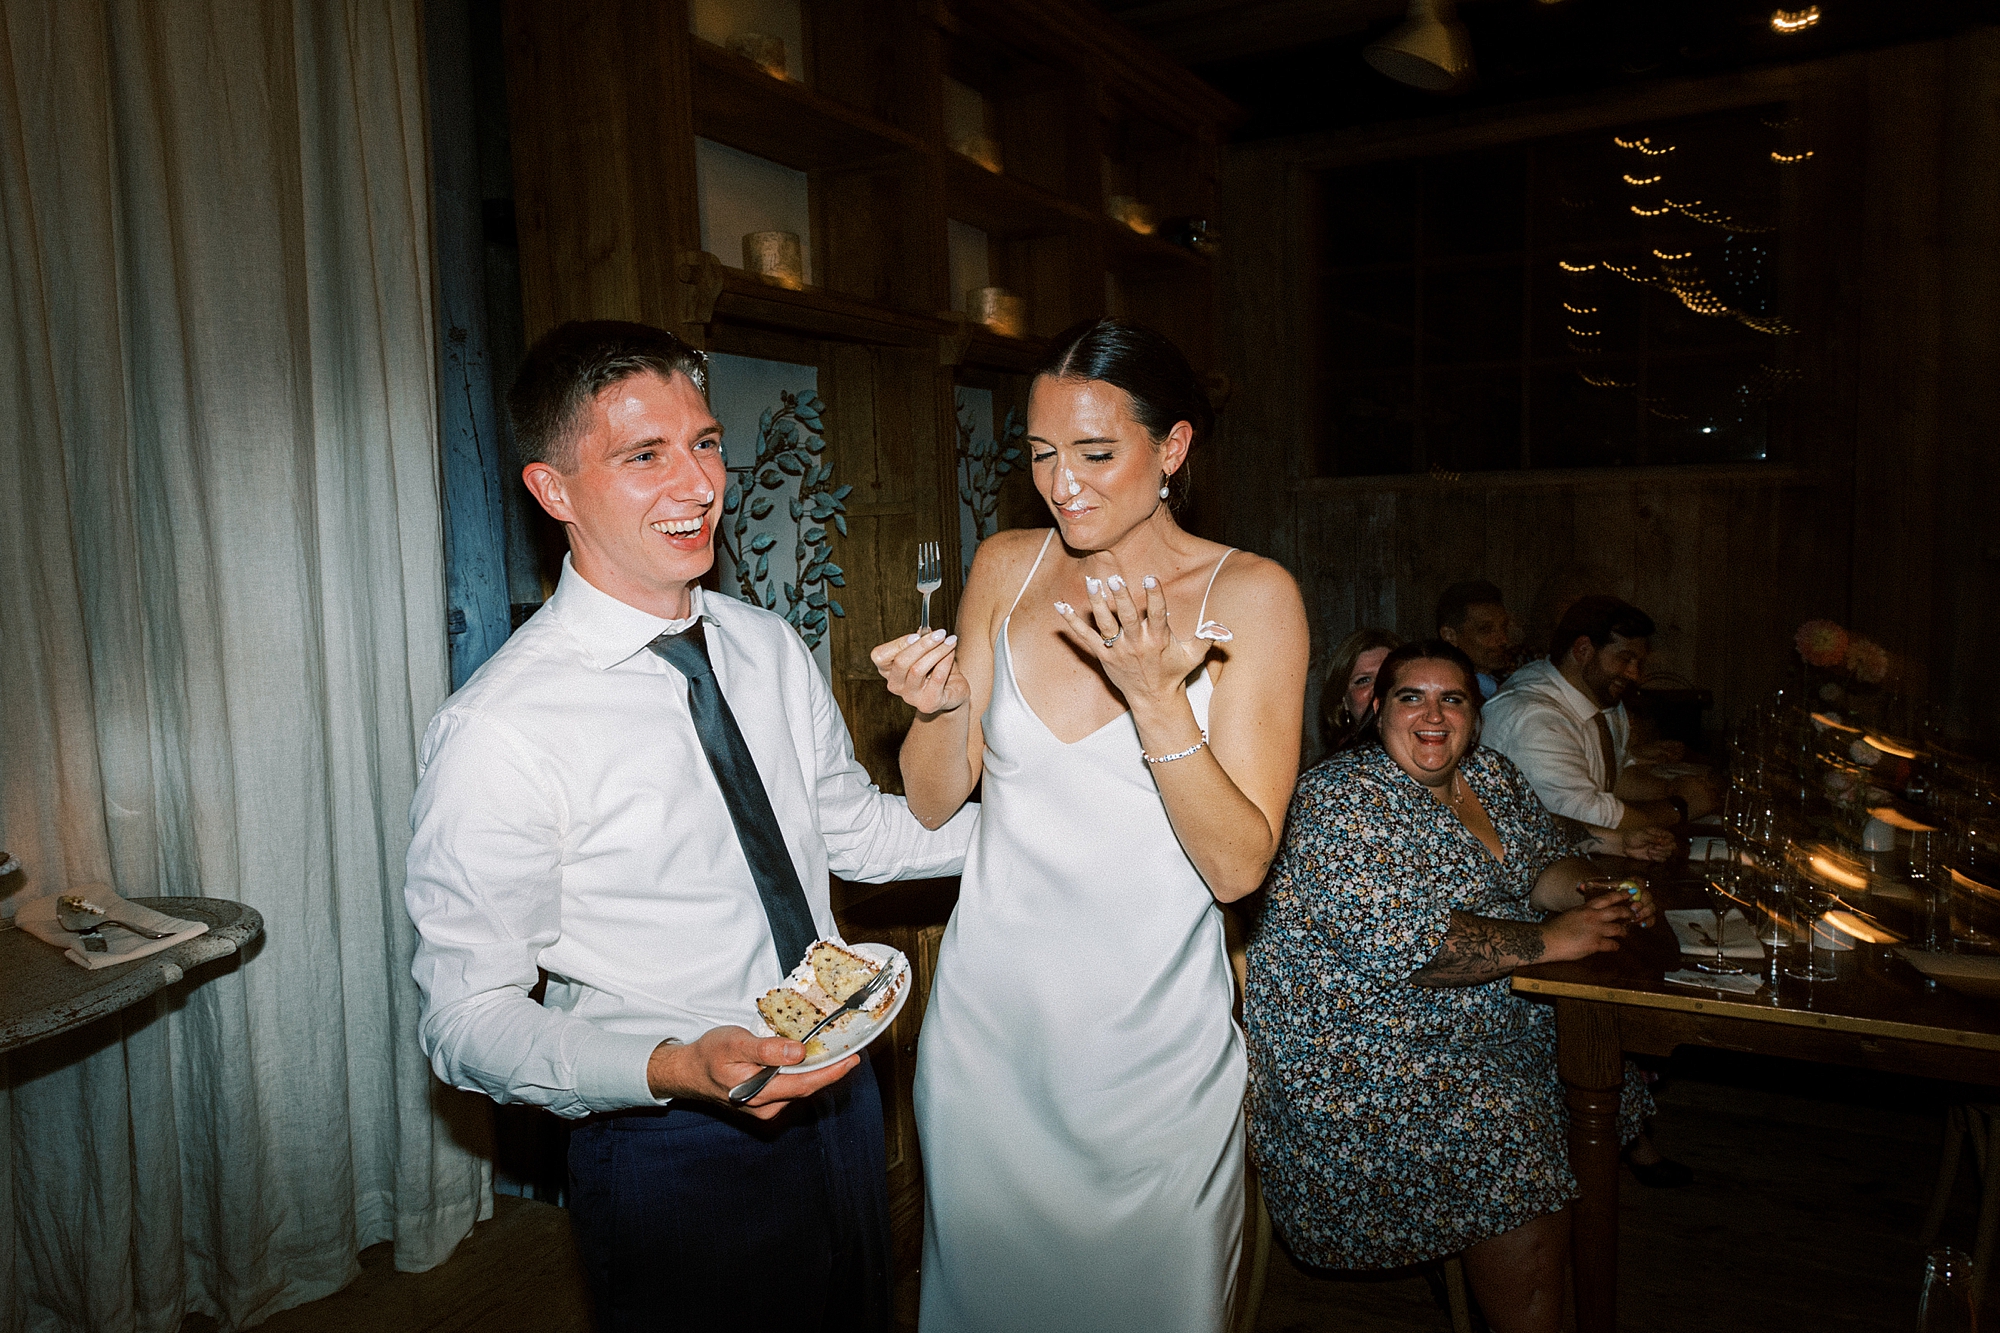 newlyweds feed each other cake during PA wedding reception